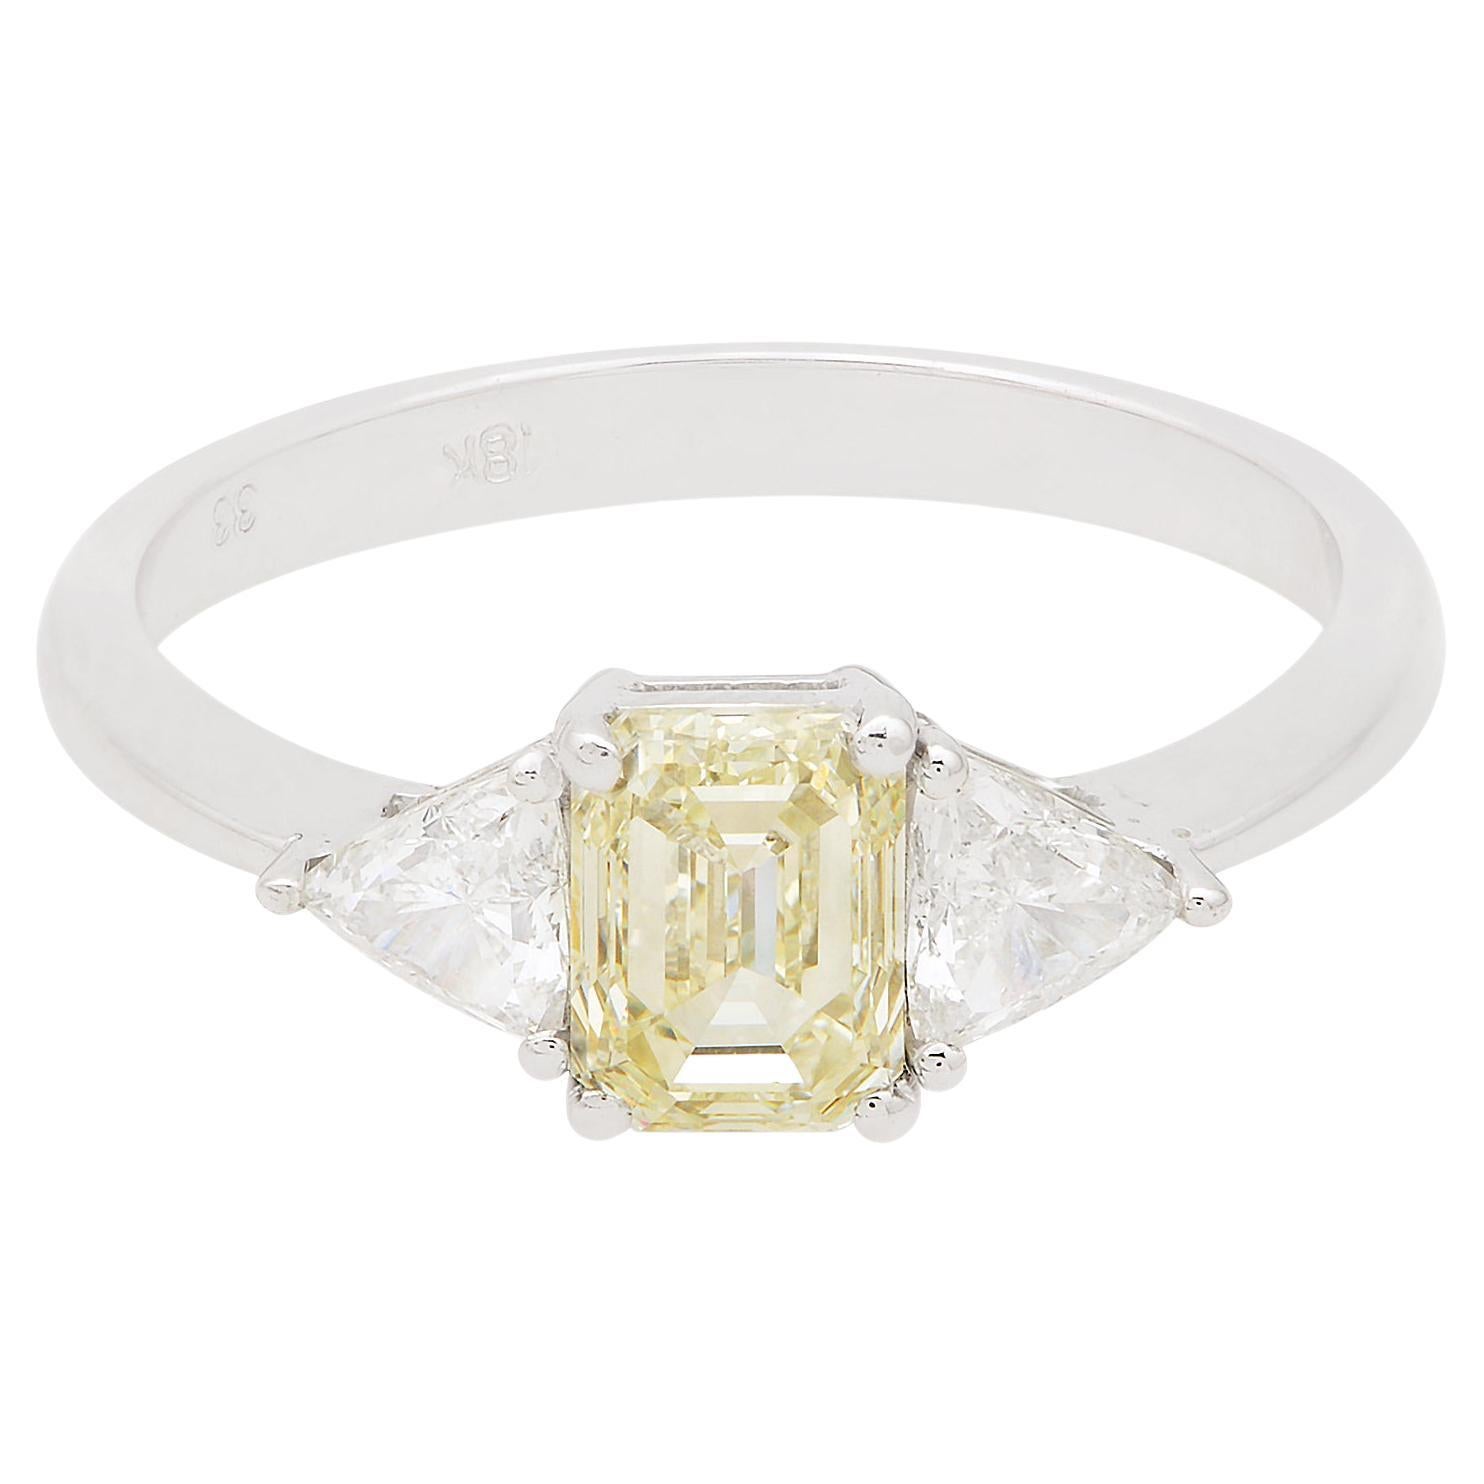 For Sale:  Natural 1.53 Carat SI Clarity HI Color Diamond Ring Solid 18k White Gold Jewelry